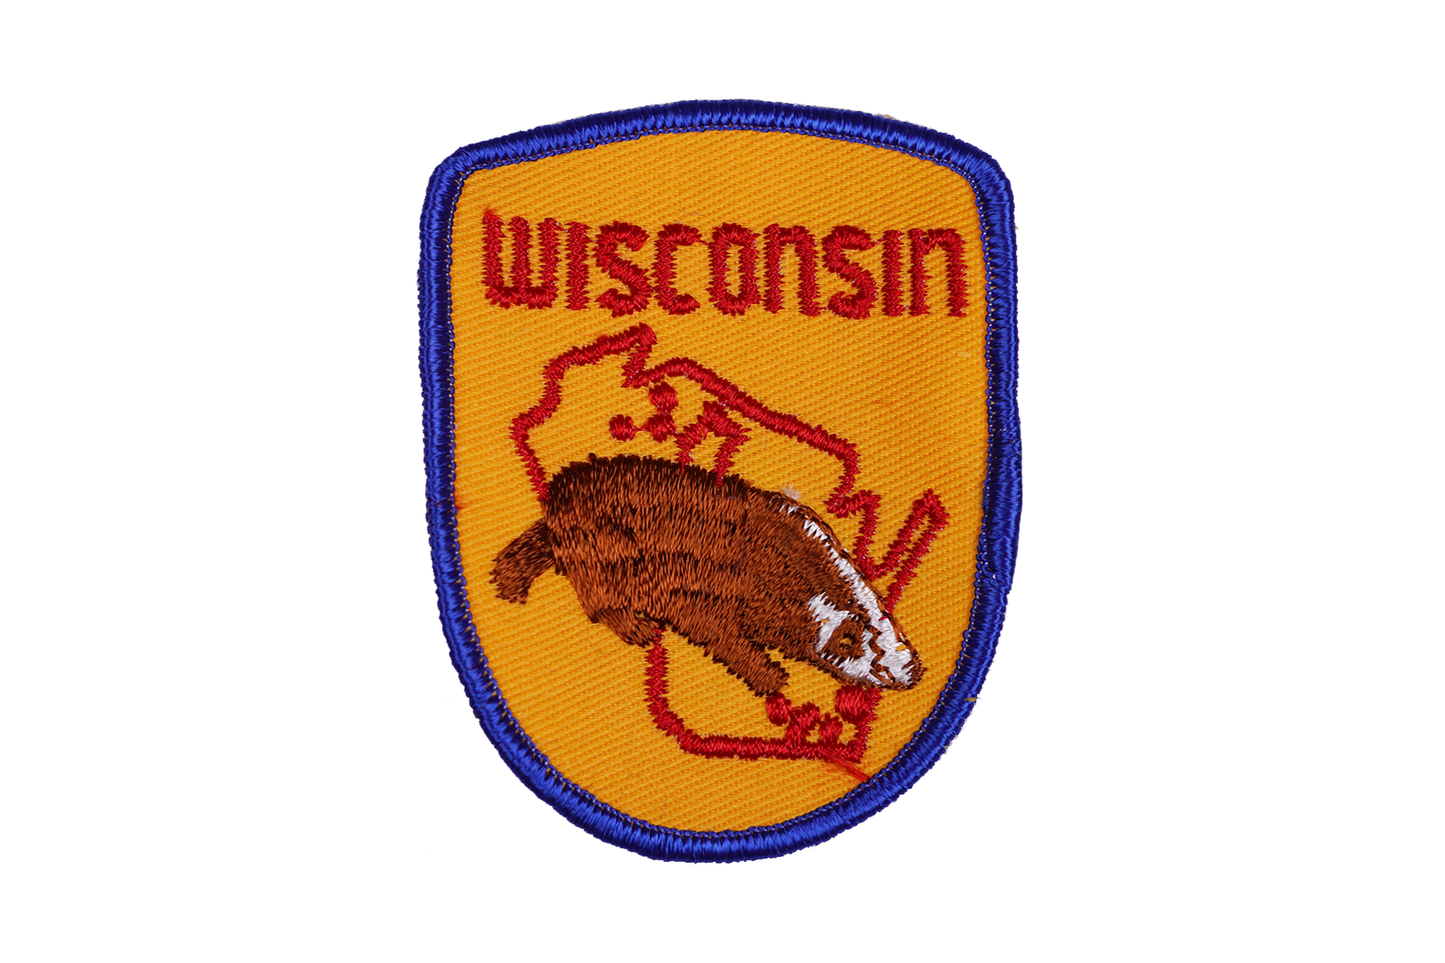 Vintage Wisconsin Embroidered Patch